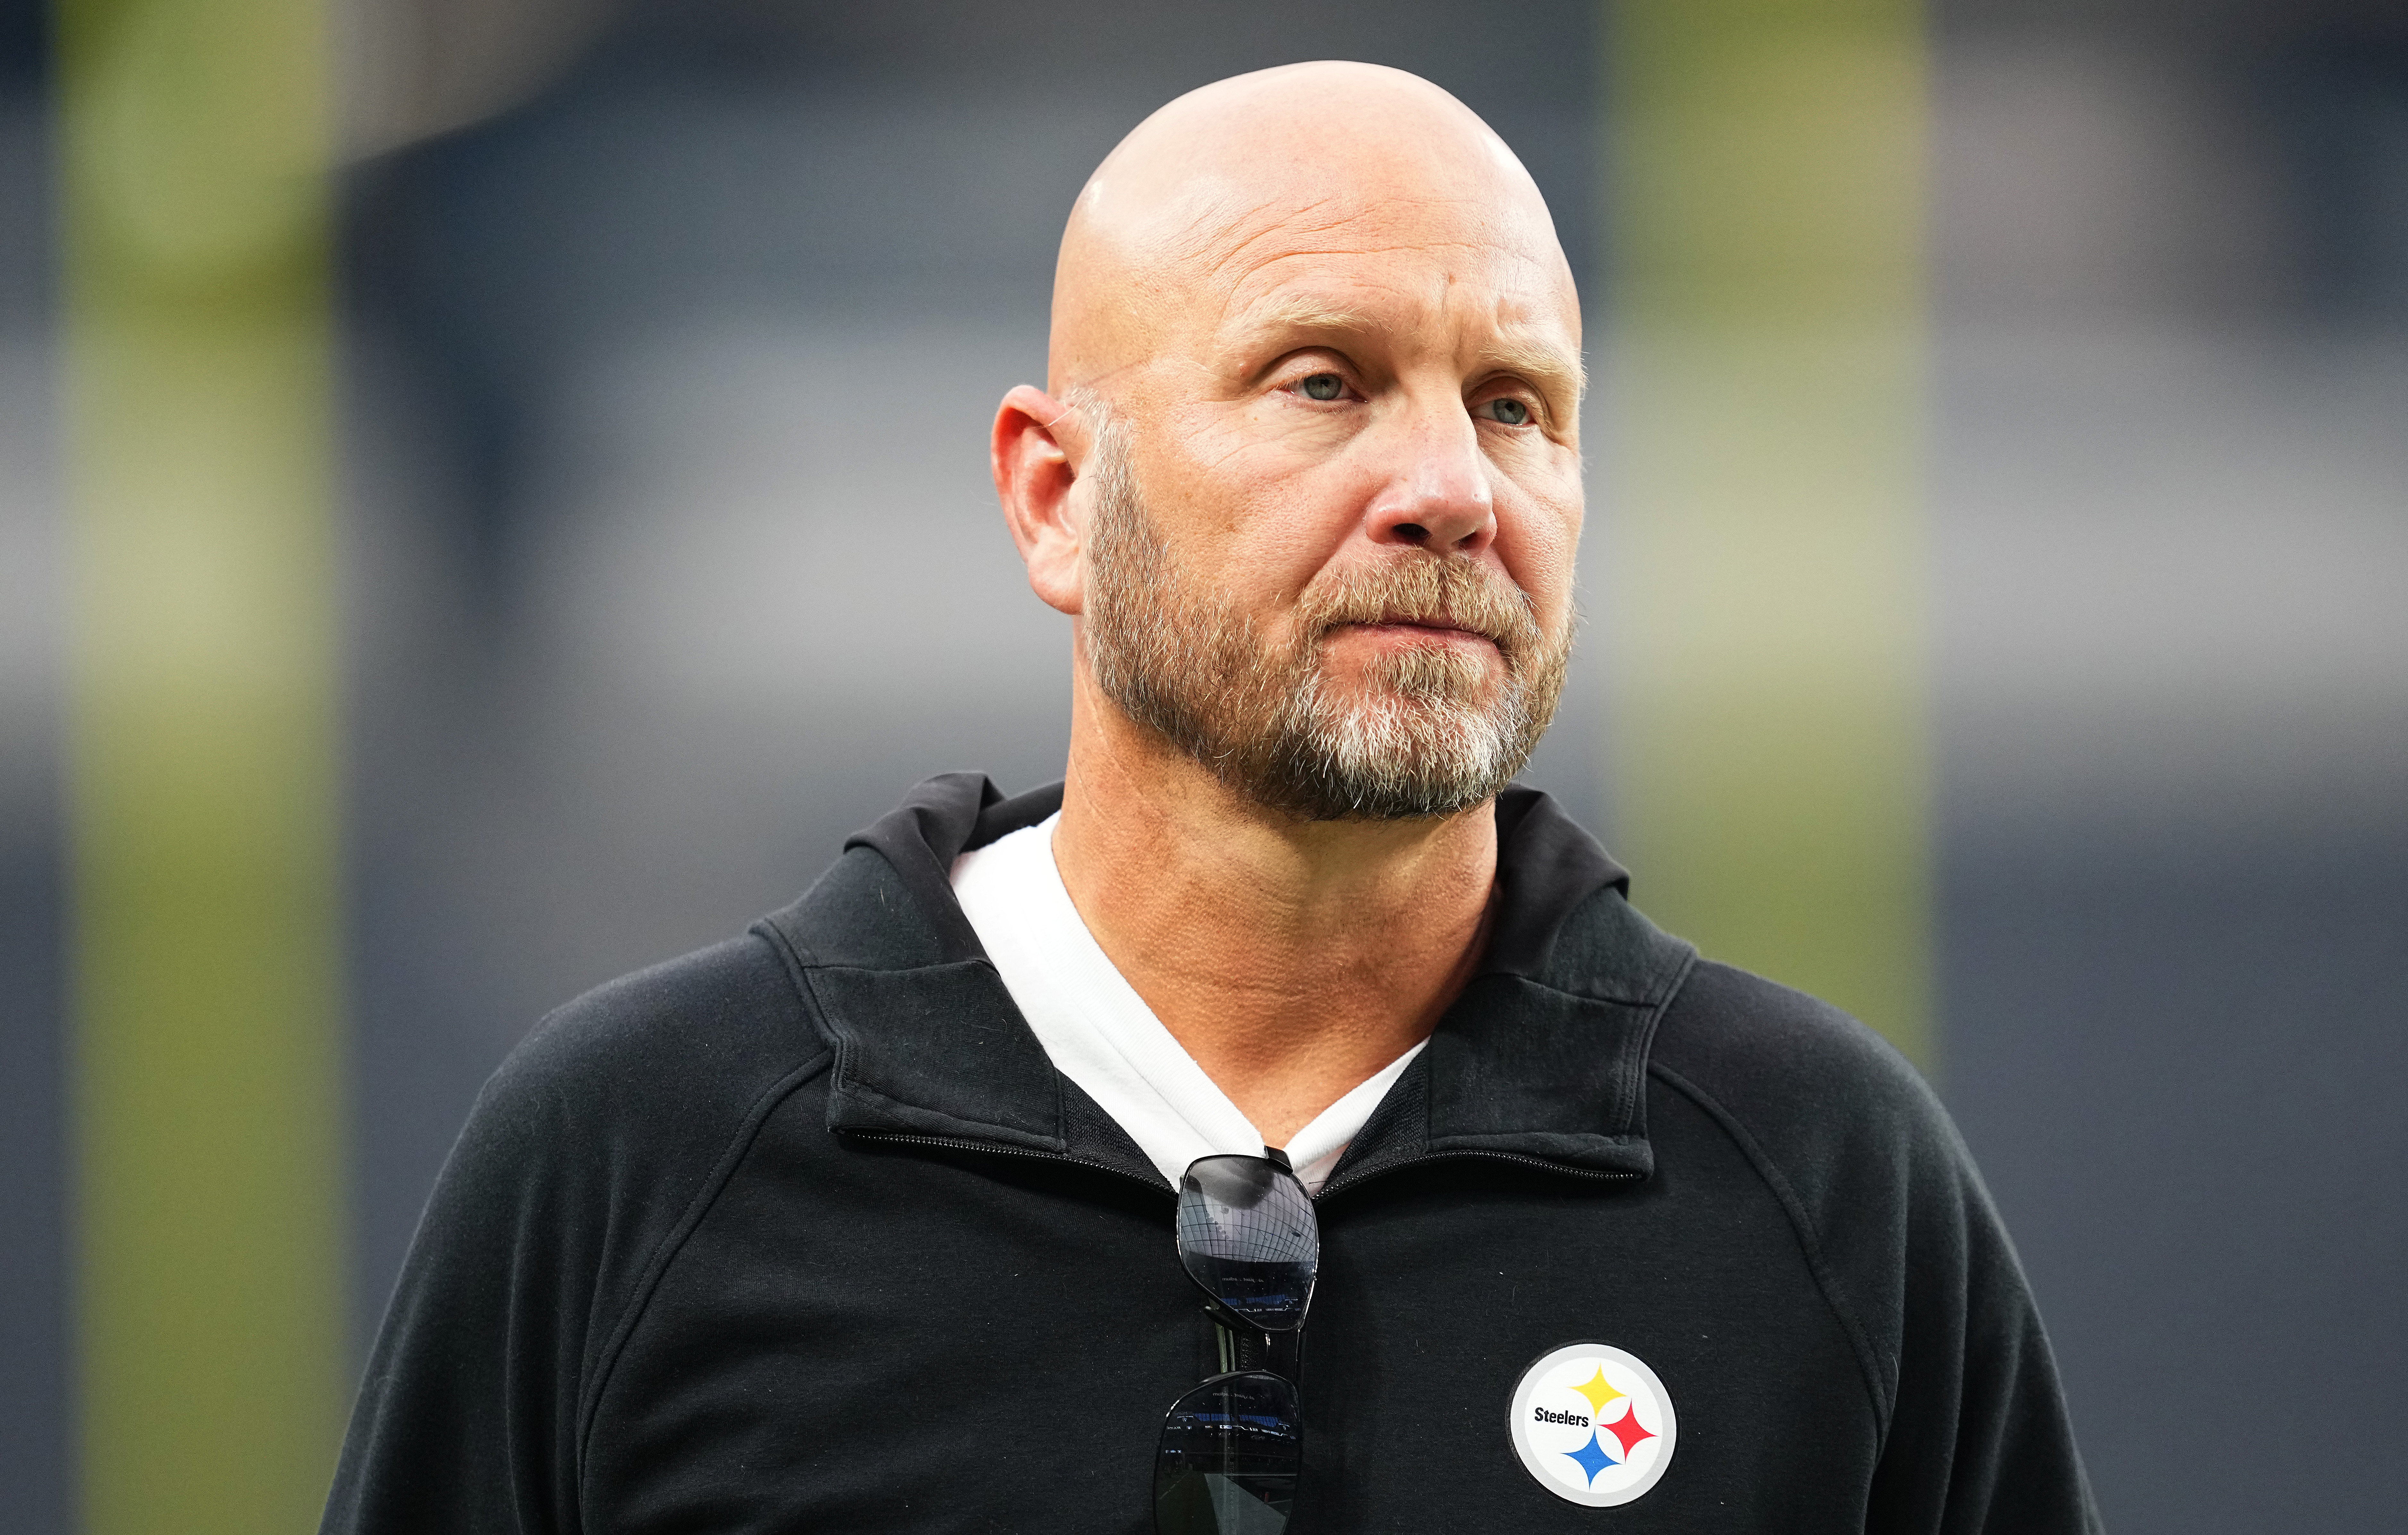 2022 Pittsburgh Steelers Schedule: Tracking the news and rumors